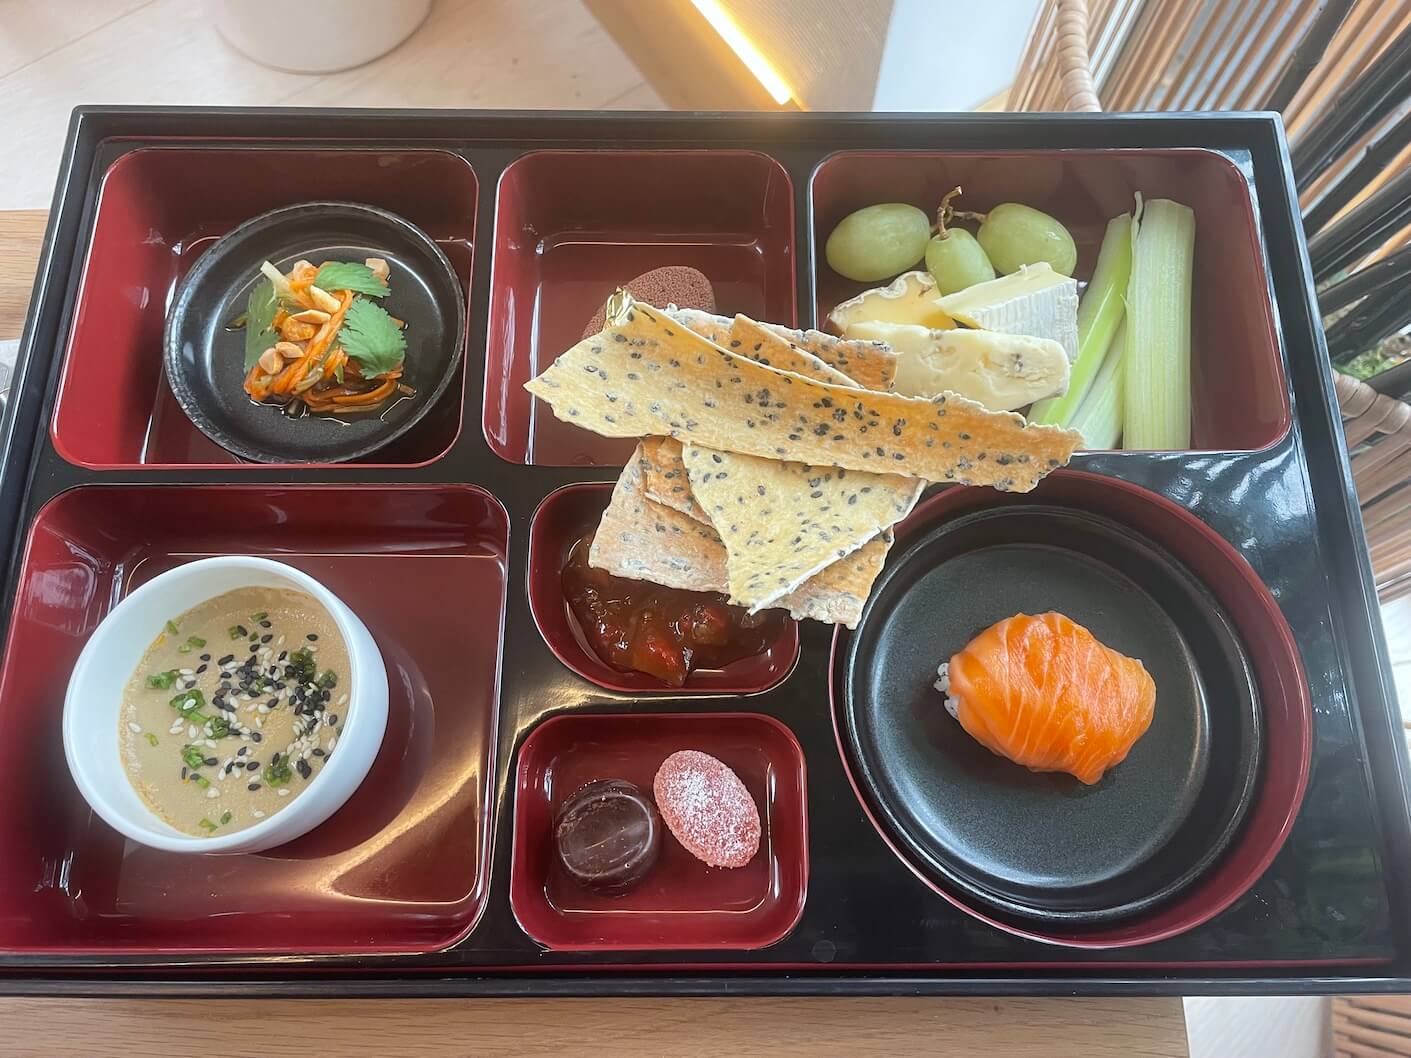 Our bento box lunch as part of our Spa Trail